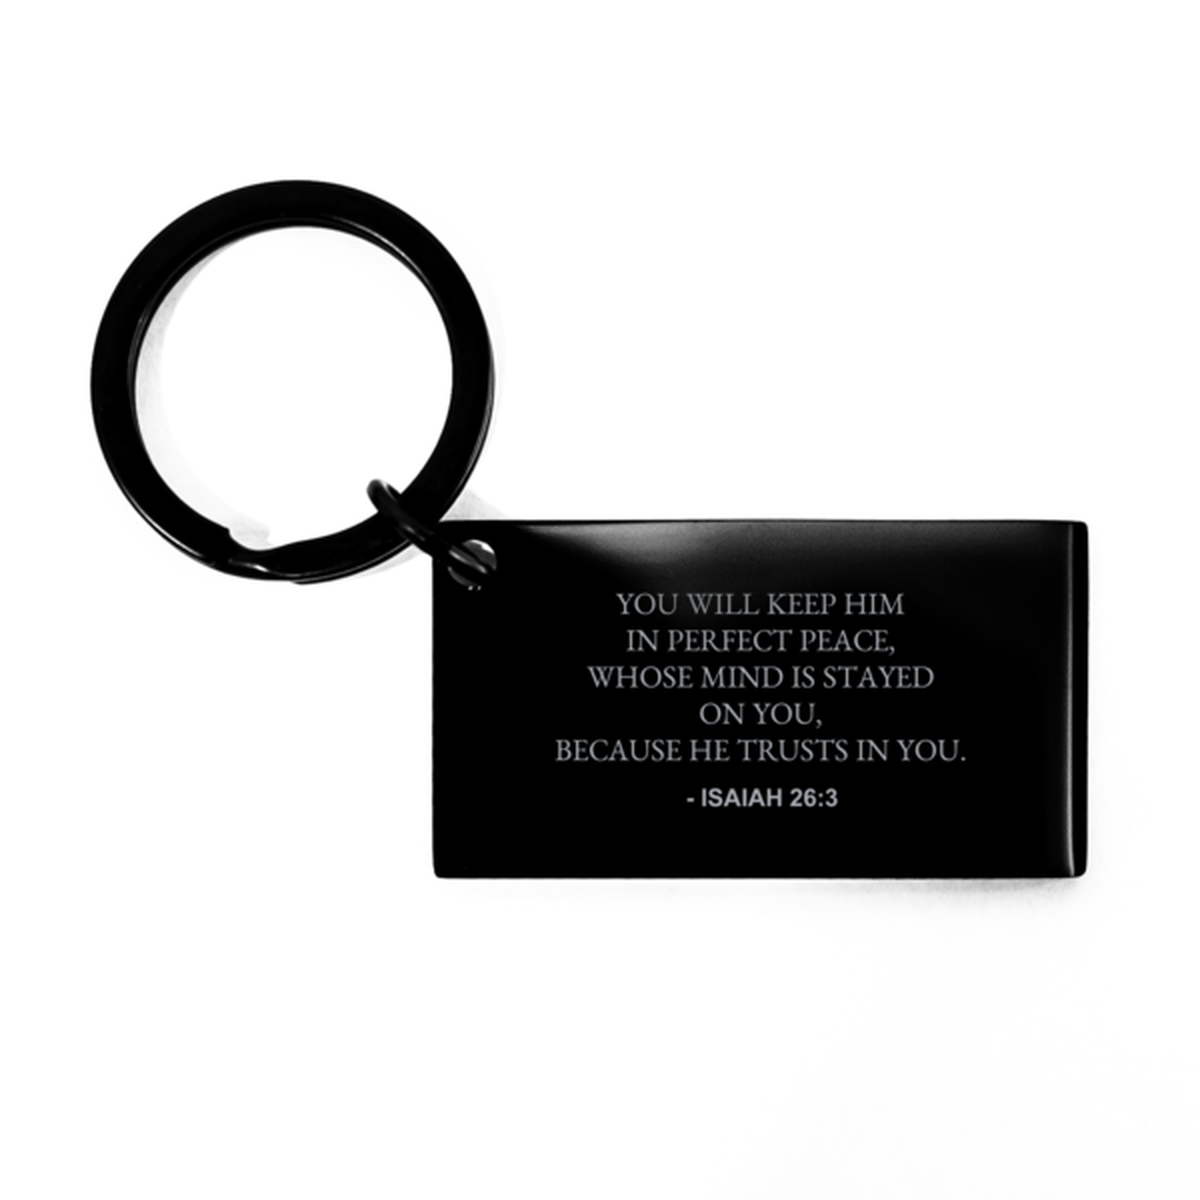 Bible Verse Black Keychain, Isaiah 26:3 You Will Keep Him In Perfect Peace, Whose Mind, Christian Inspirational Key Ring Gifts For Men Women